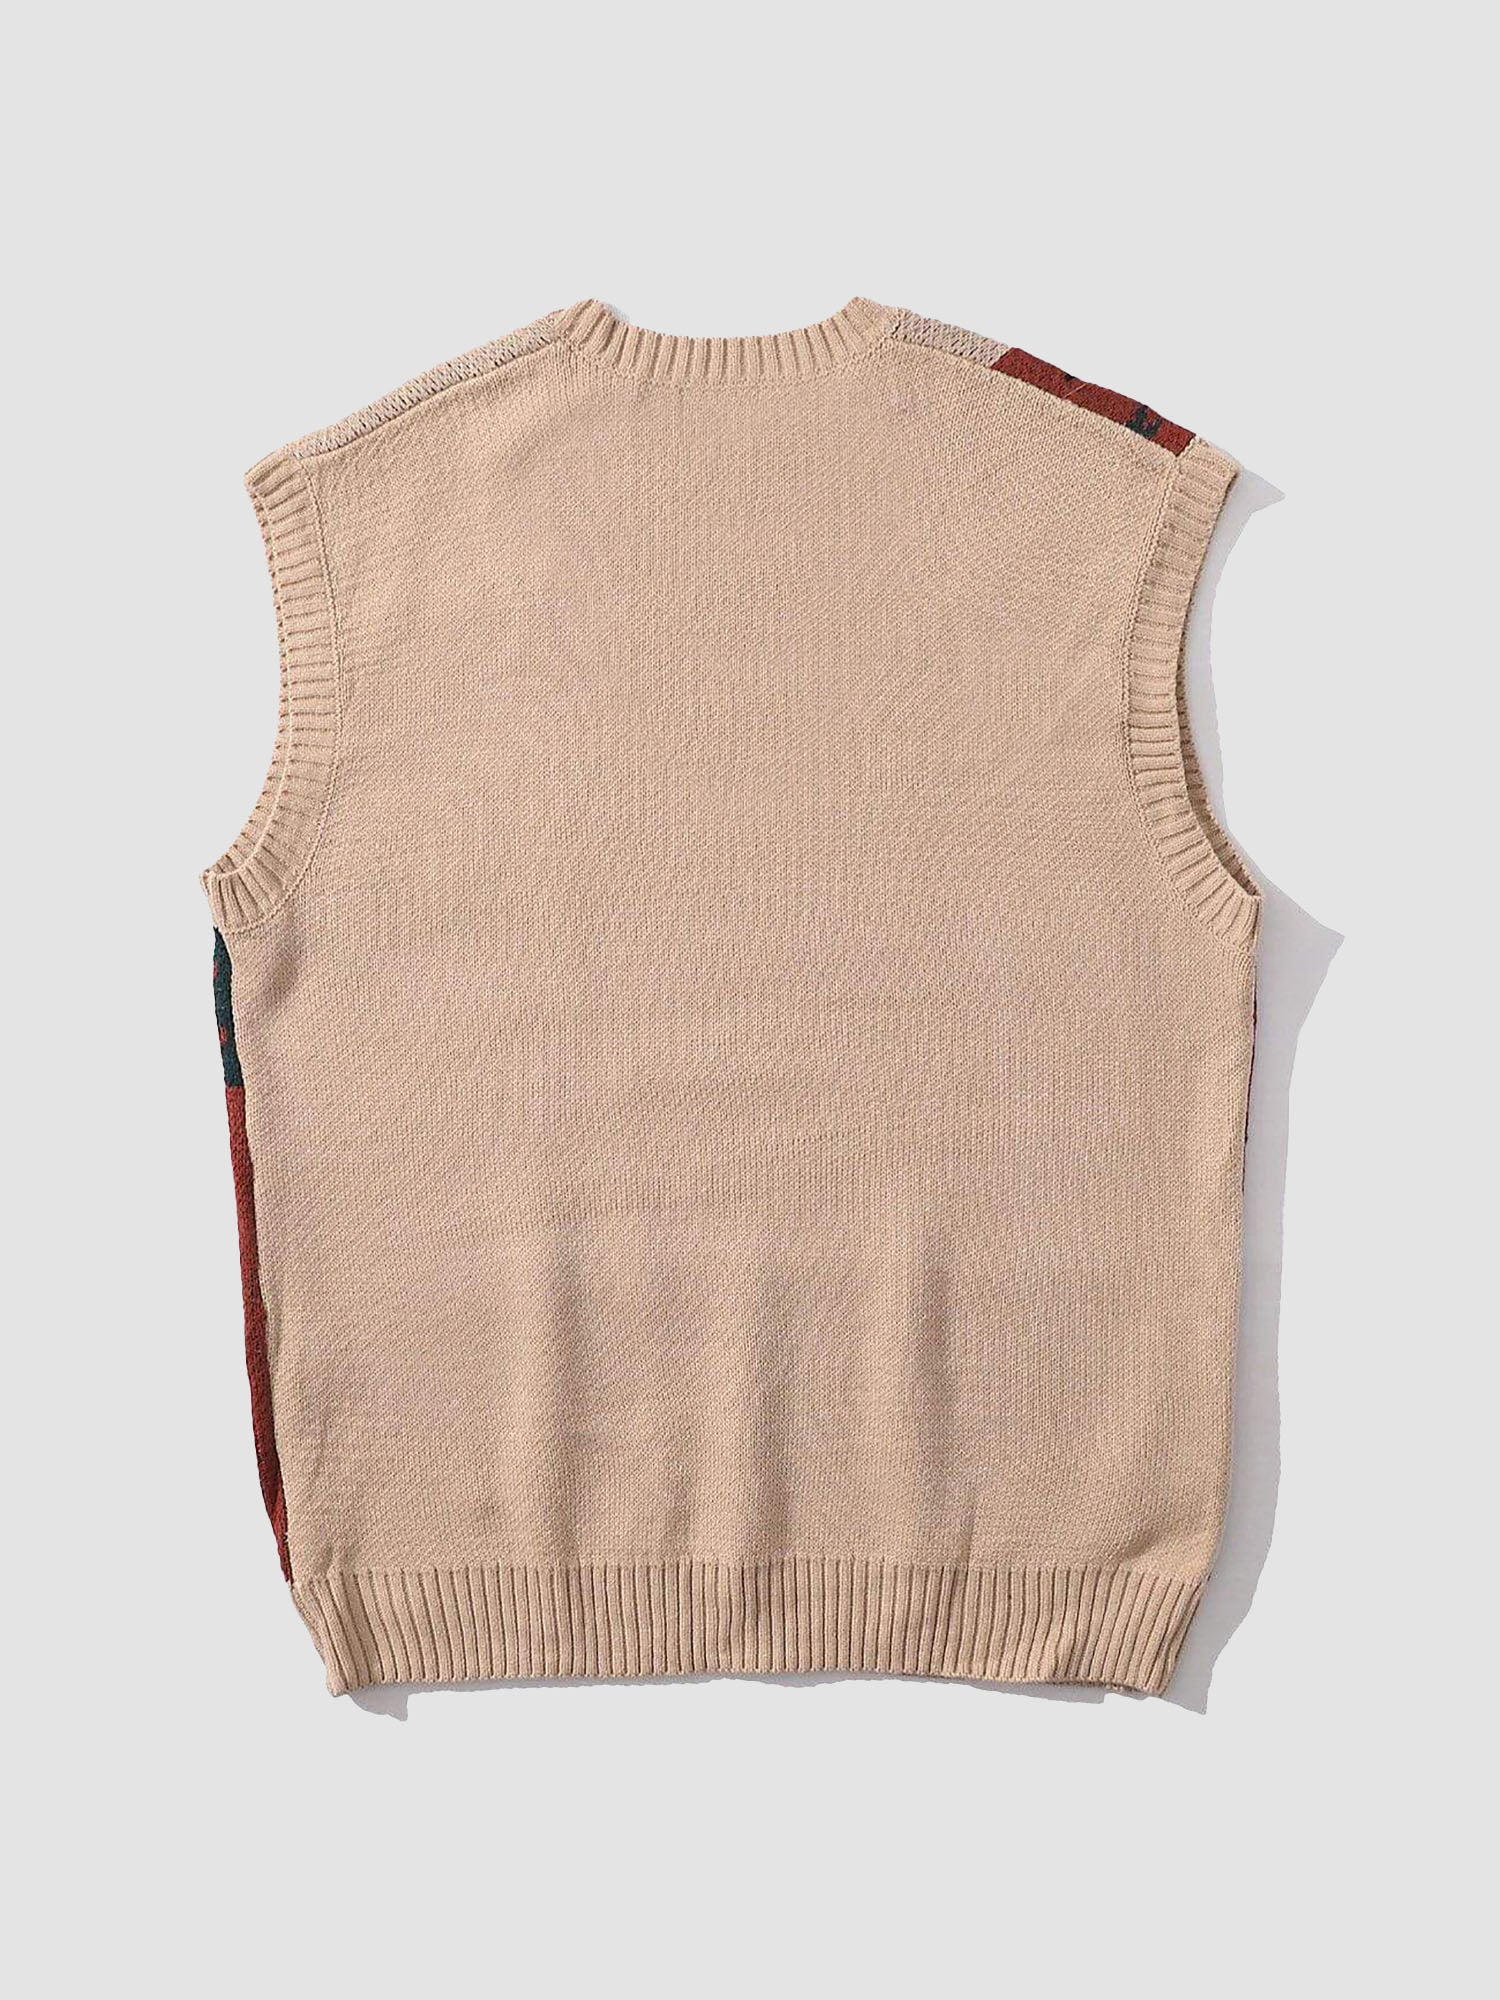 JUSTNOTAG Lily Pattern Knitted Sweater Vest